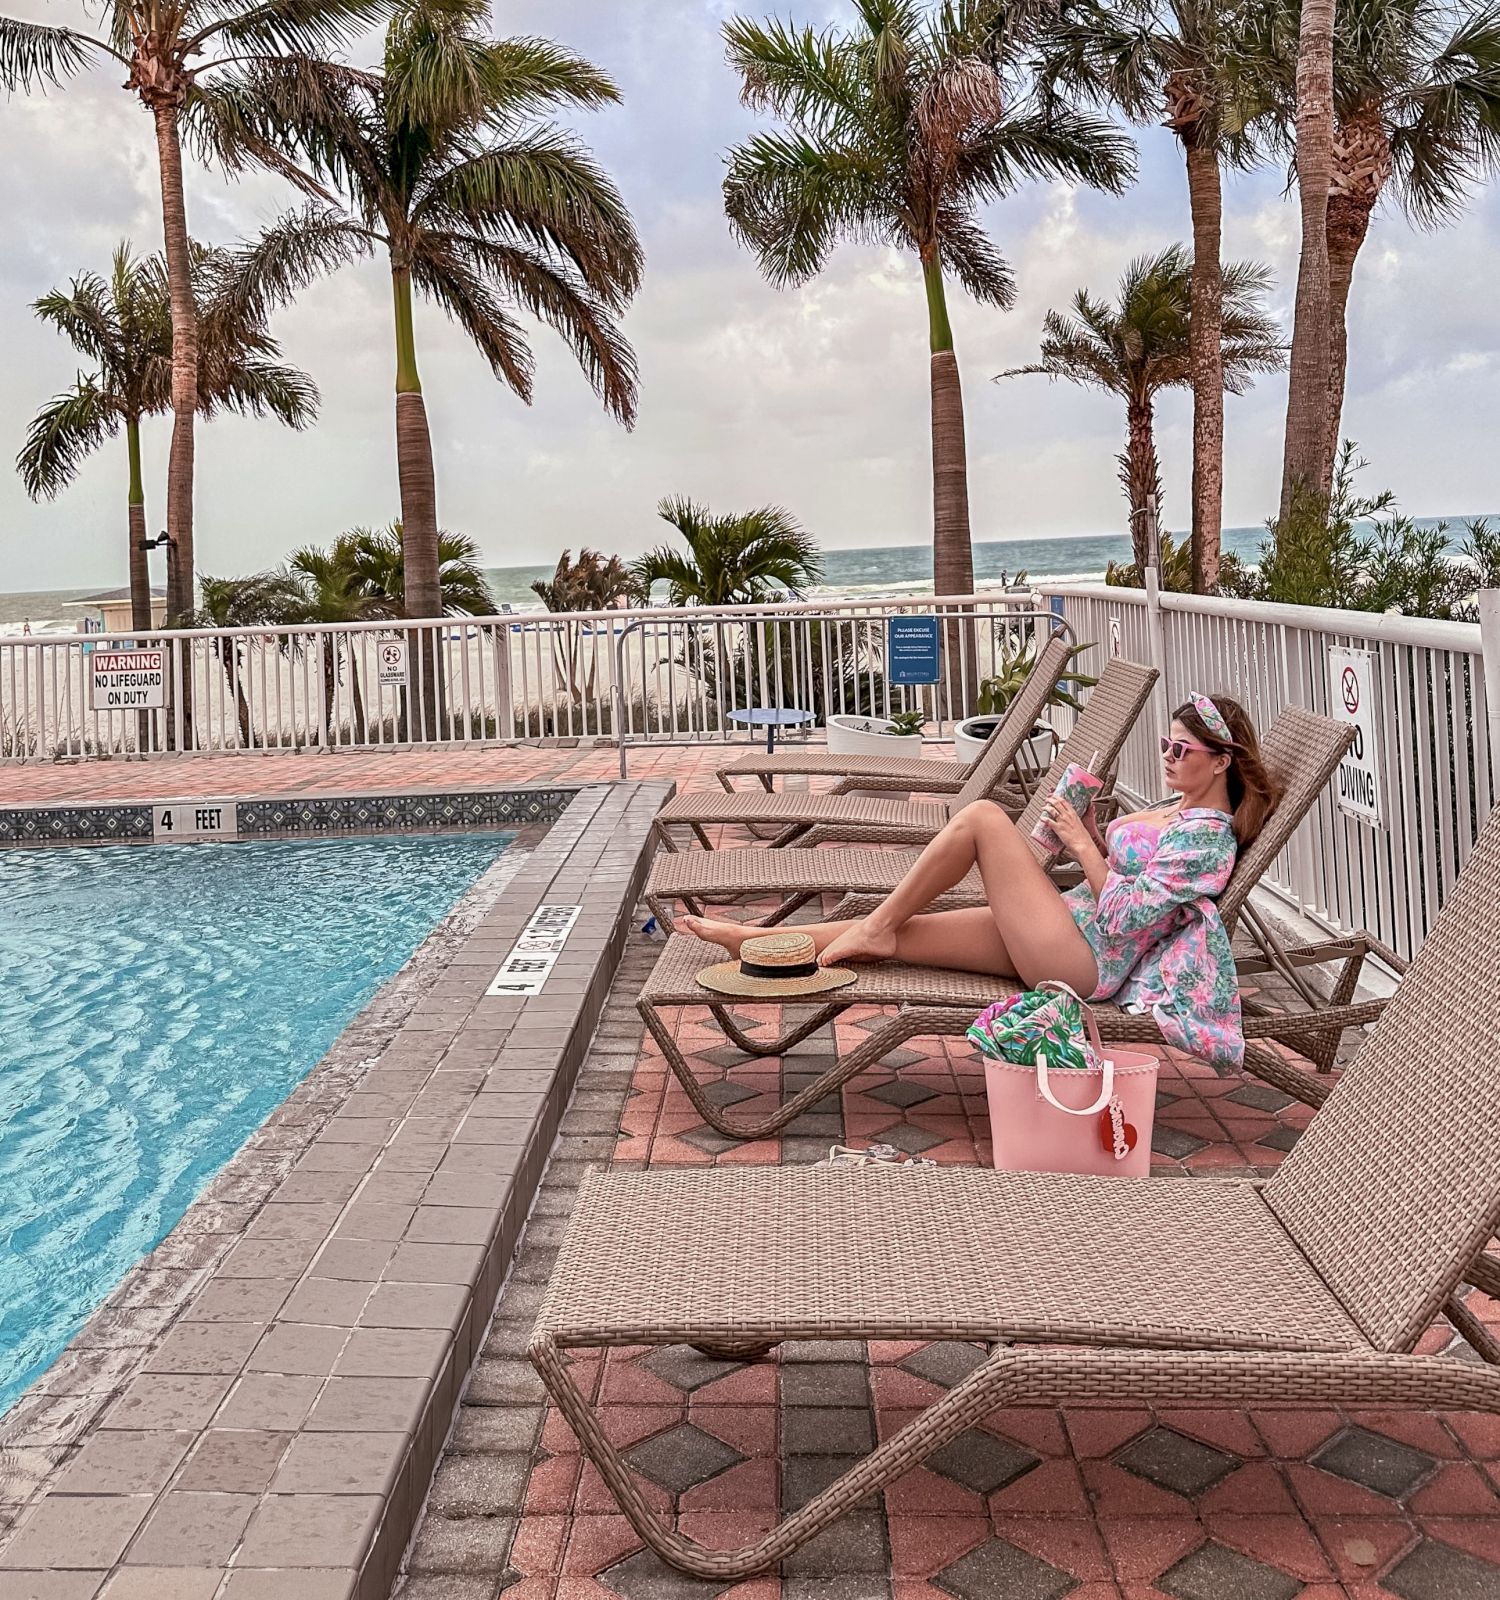 Person relaxing by a pool with palm trees and cloudy sky.